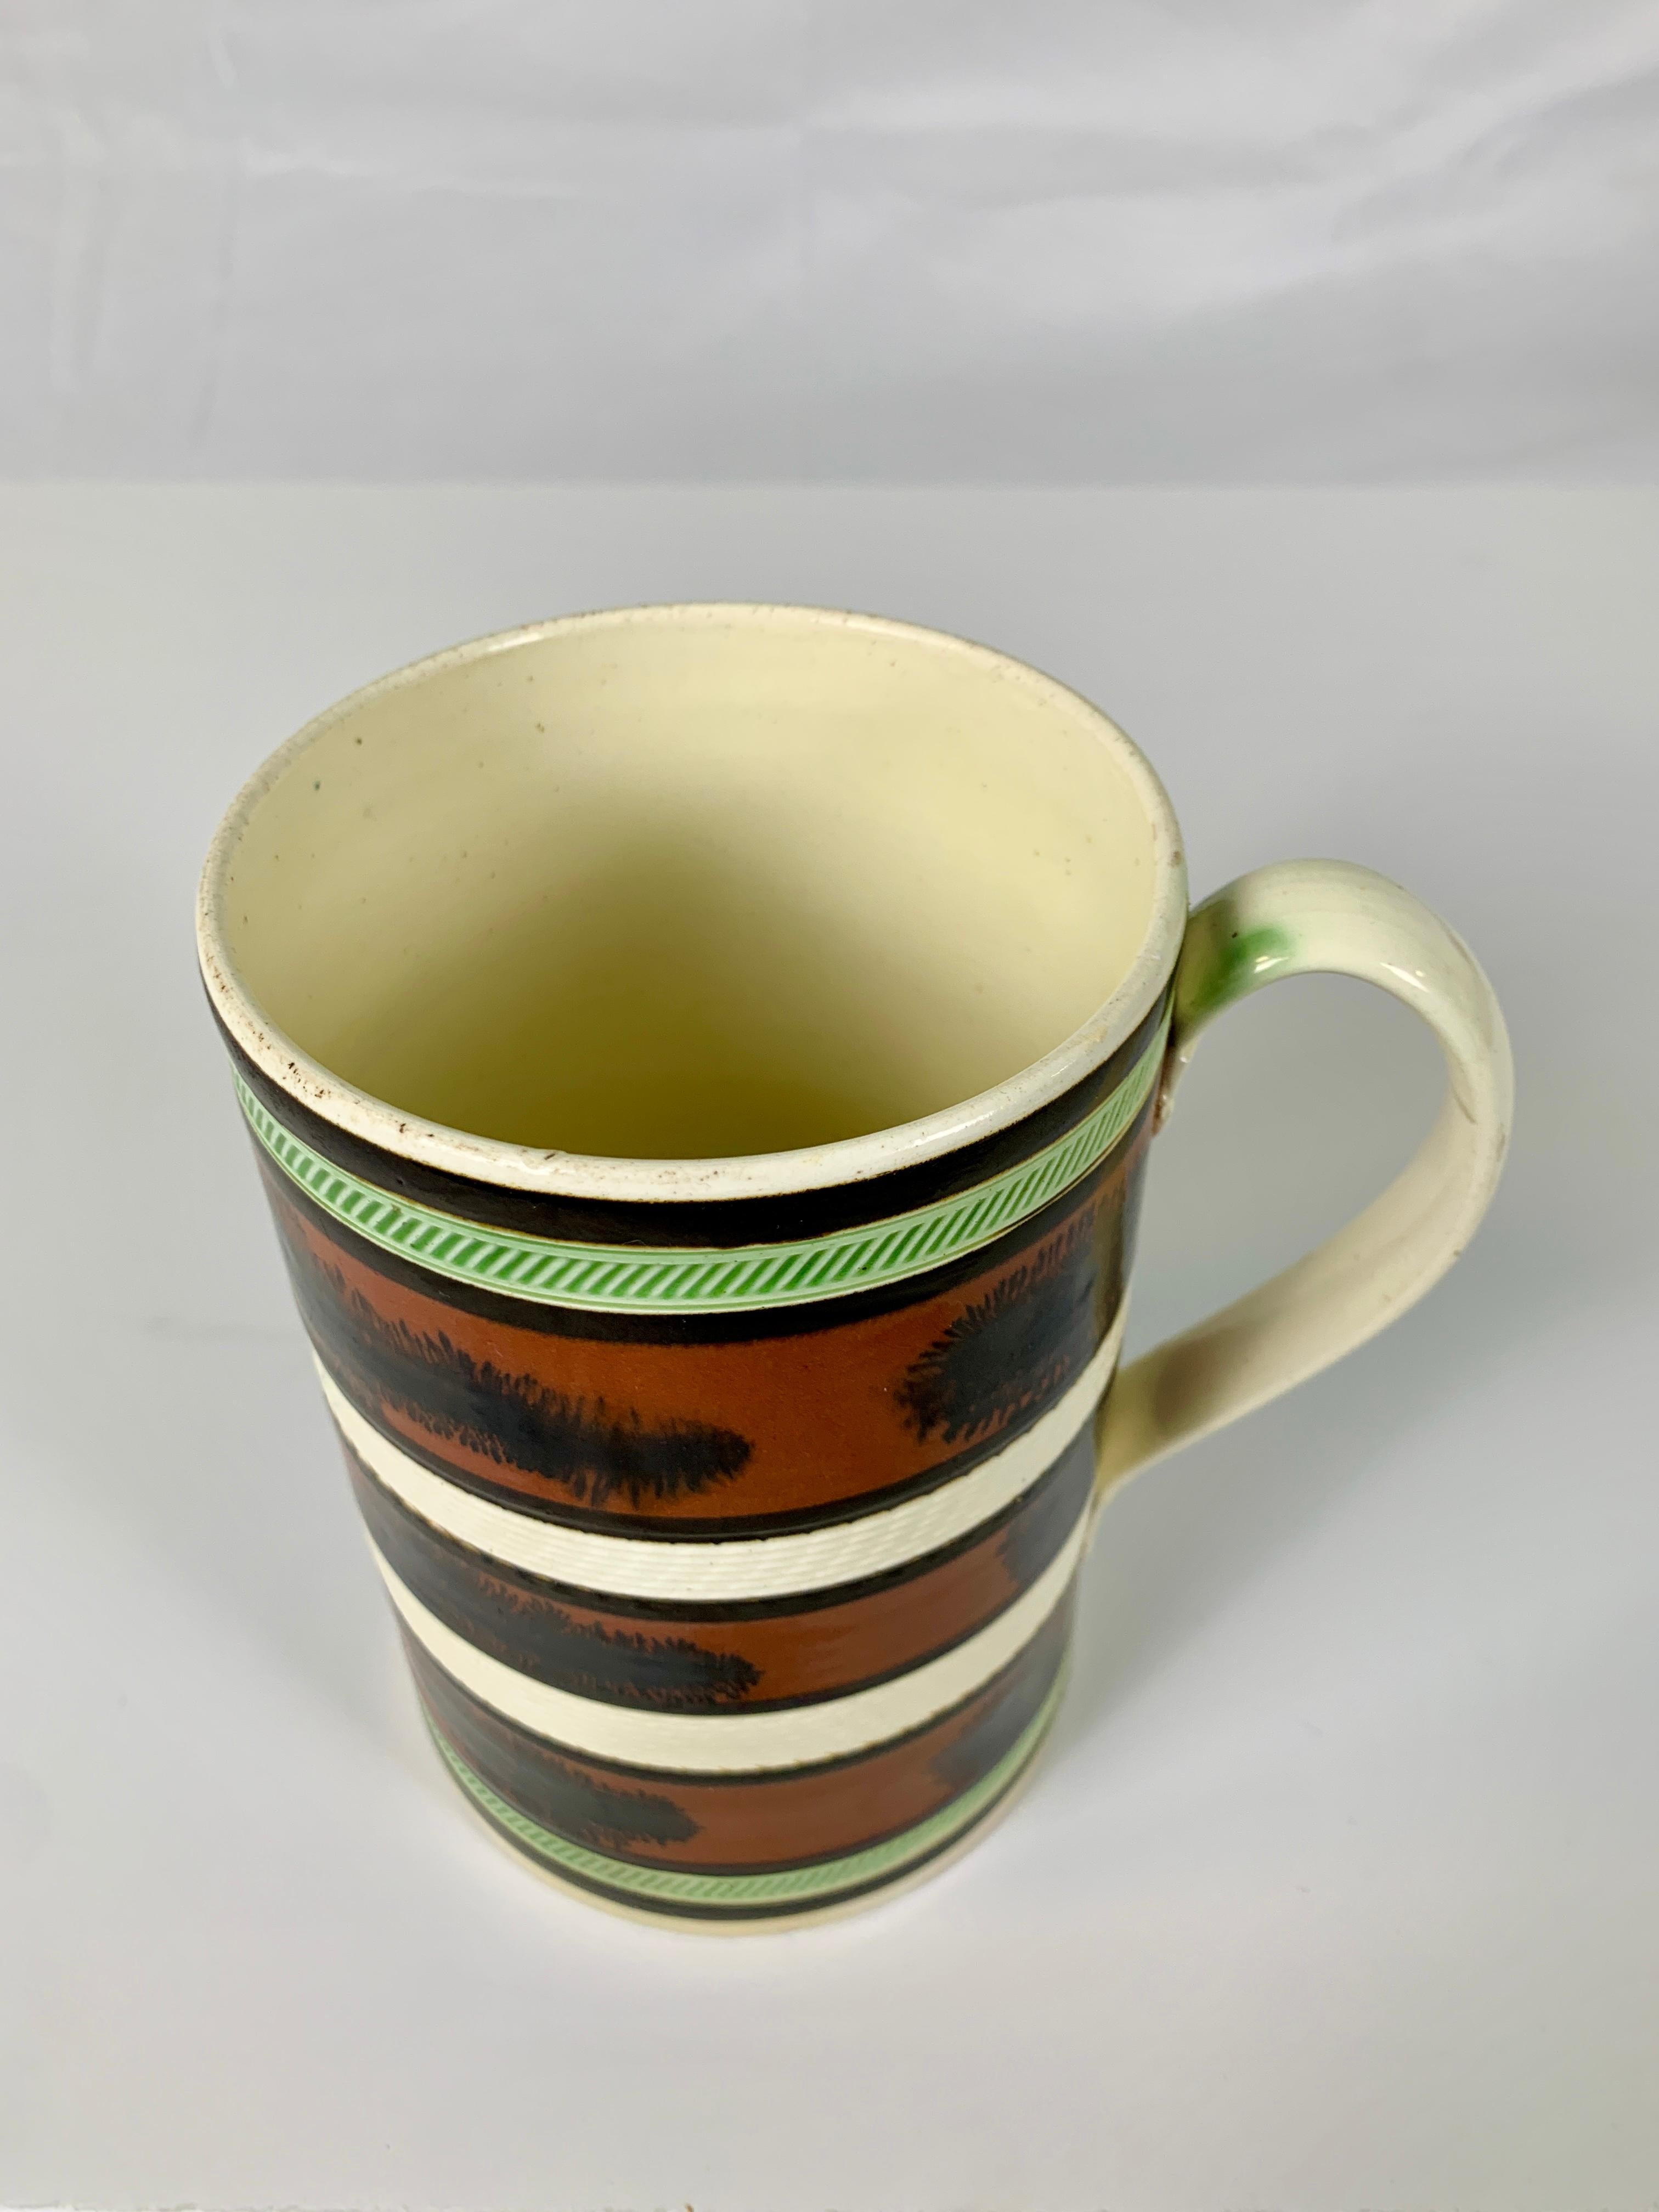 Made in England circa 1800, this exquisite mug is decorated with three milk chocolate-colored slip bands, each band with midnight brown 